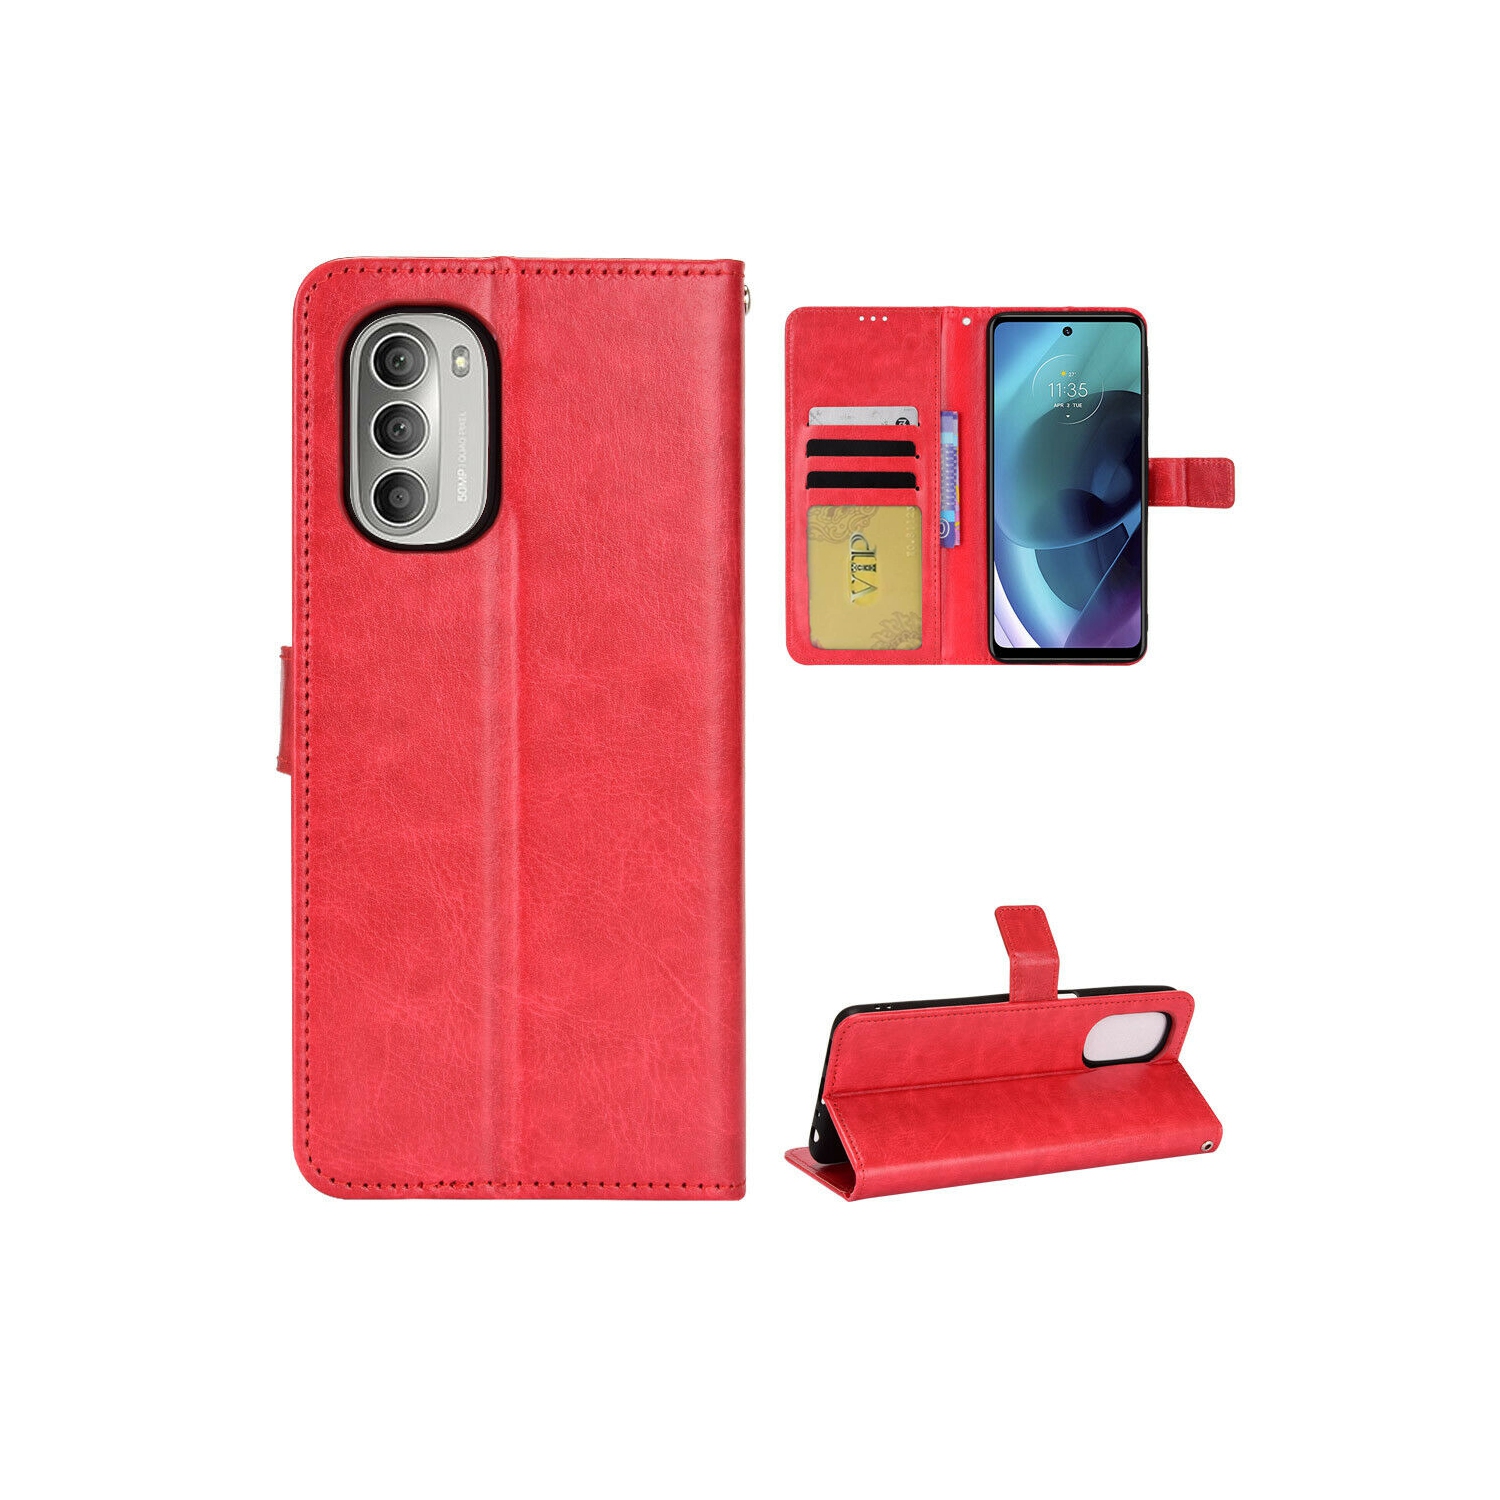 [CS] Motorola Moto G Stylus 5G 2022 Case, Magnetic Leather Folio Wallet Flip Case Cover with Card Slot, Red